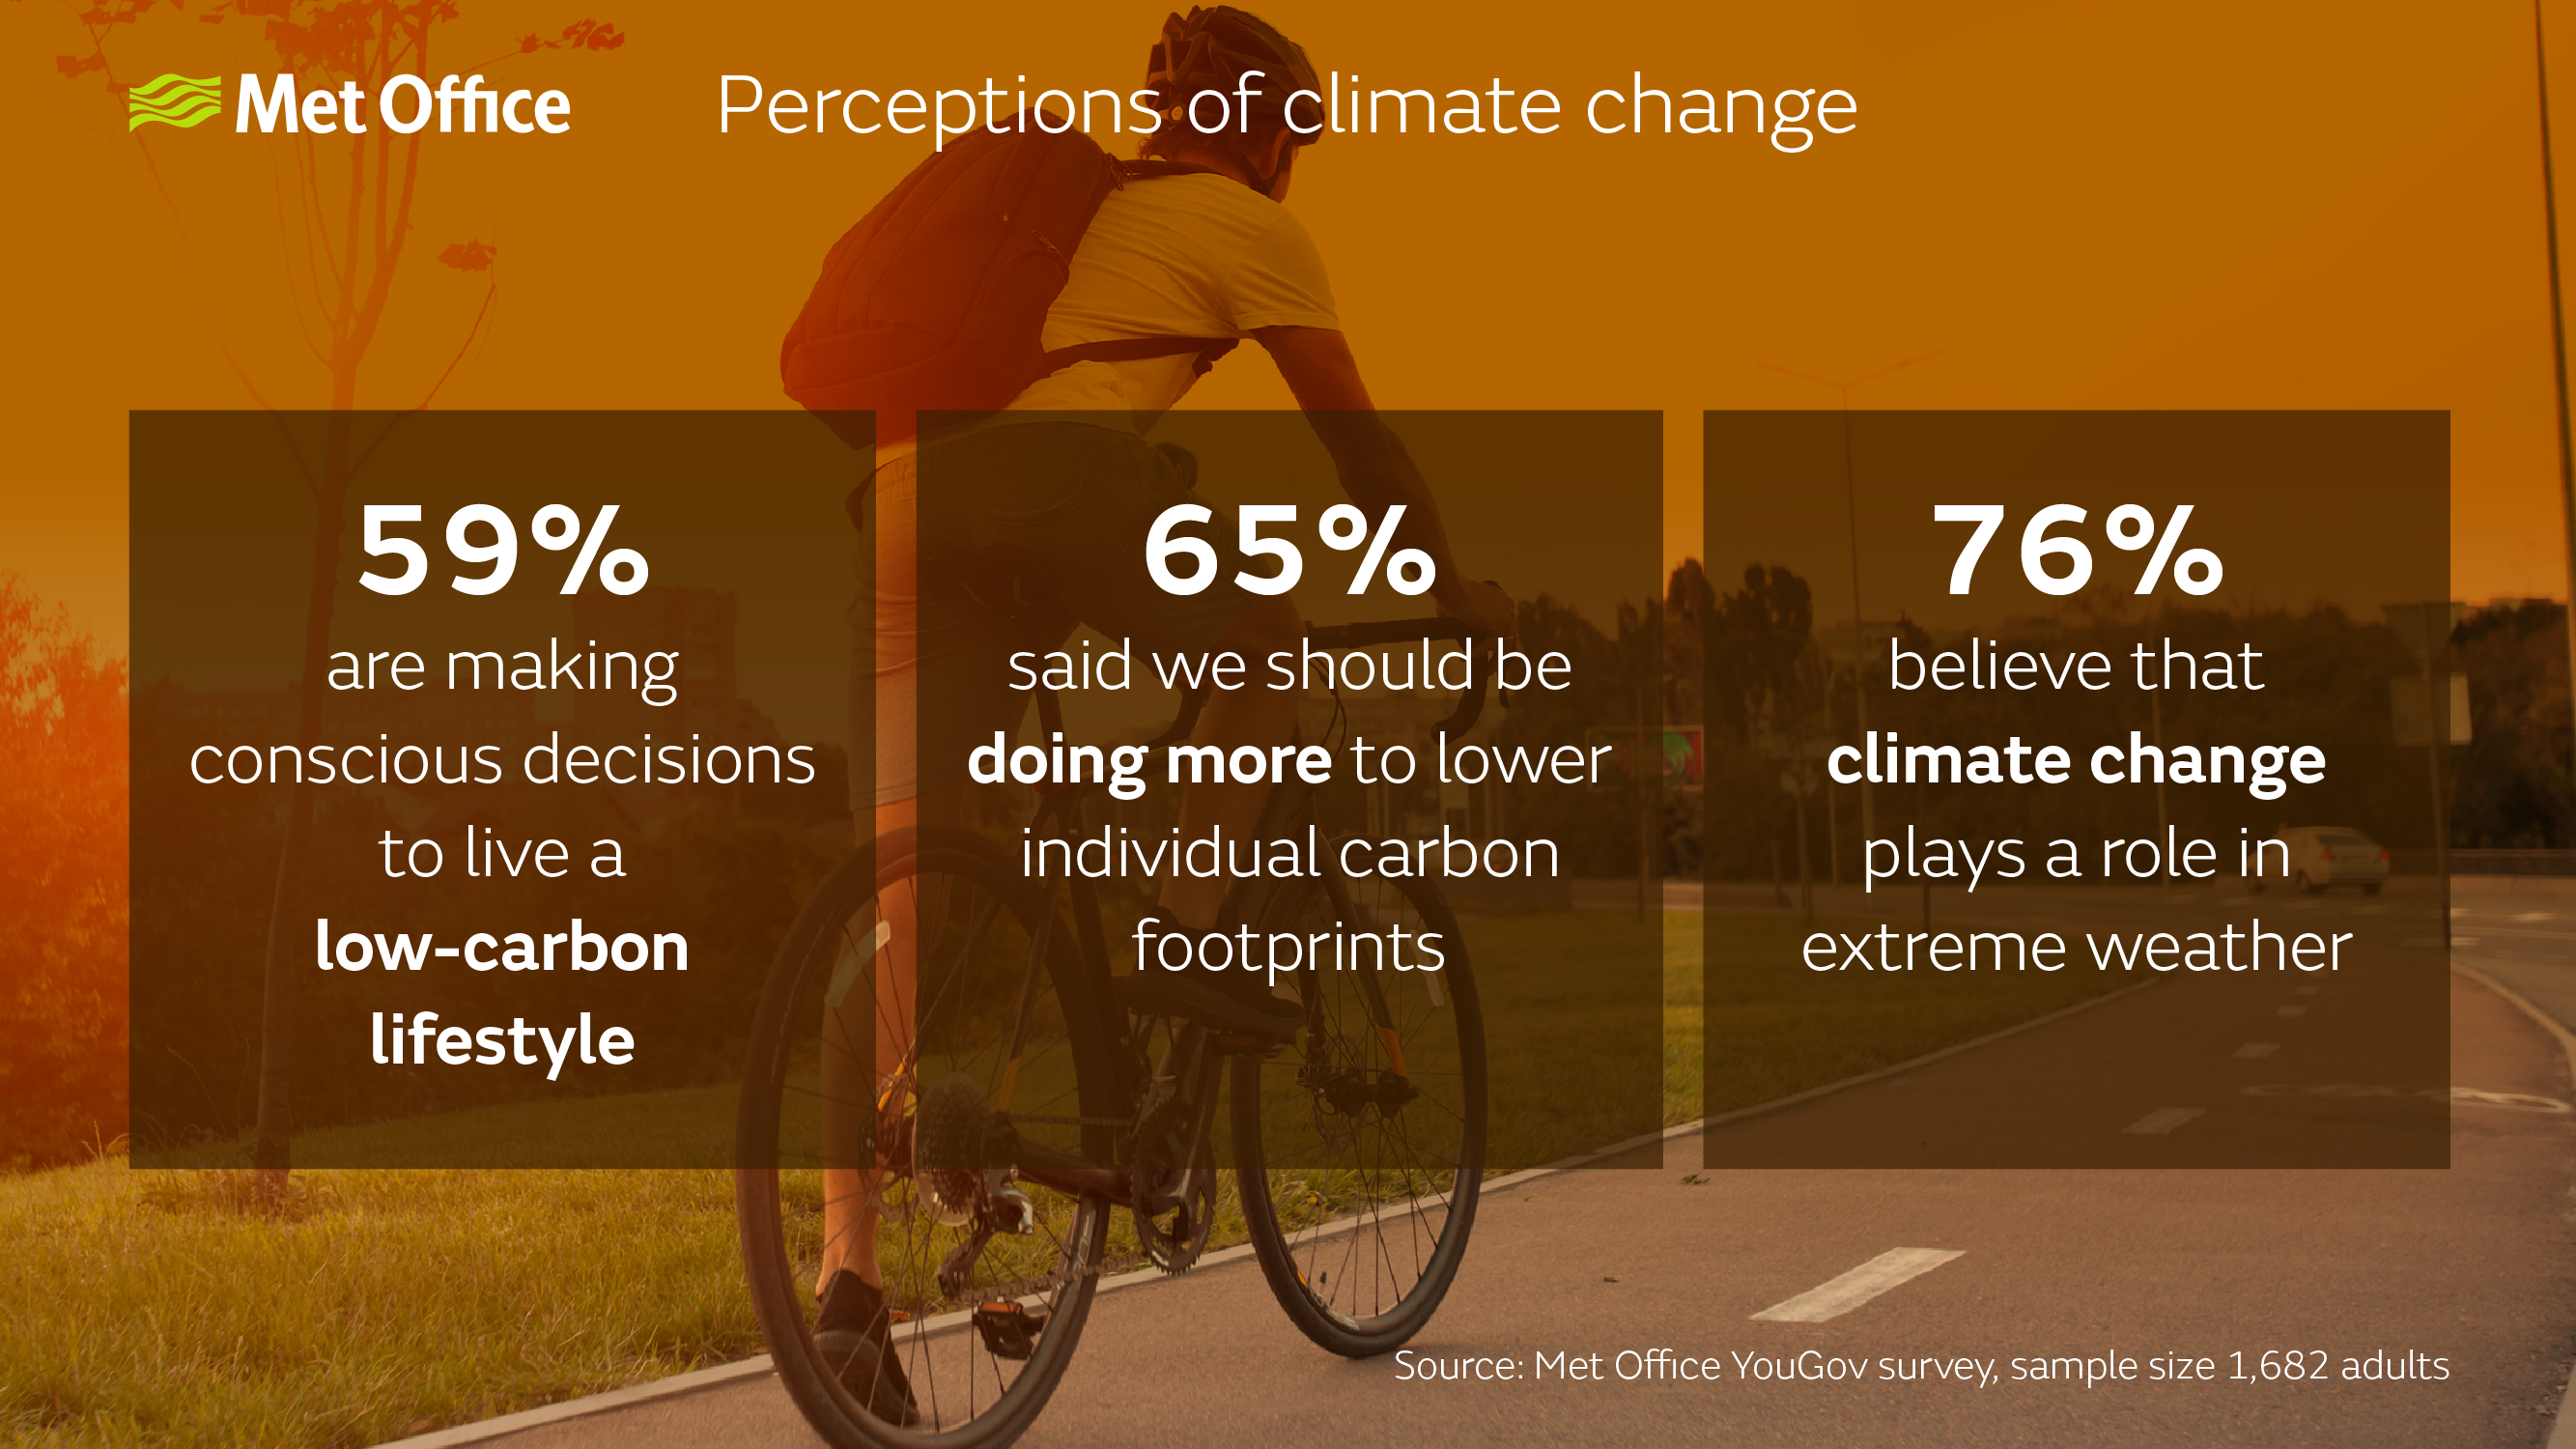 Graphic showing main findings of public polling on perceptions of climate change. 59% are making conscious decisions to live a low-carbon lifestyle. 65% said we should be doing more to lower individual carbon footprints. 76% said they believe that climate change plays a role in extreme weather. Source: Met Office YouGov survey, sample size 1,682 adults.